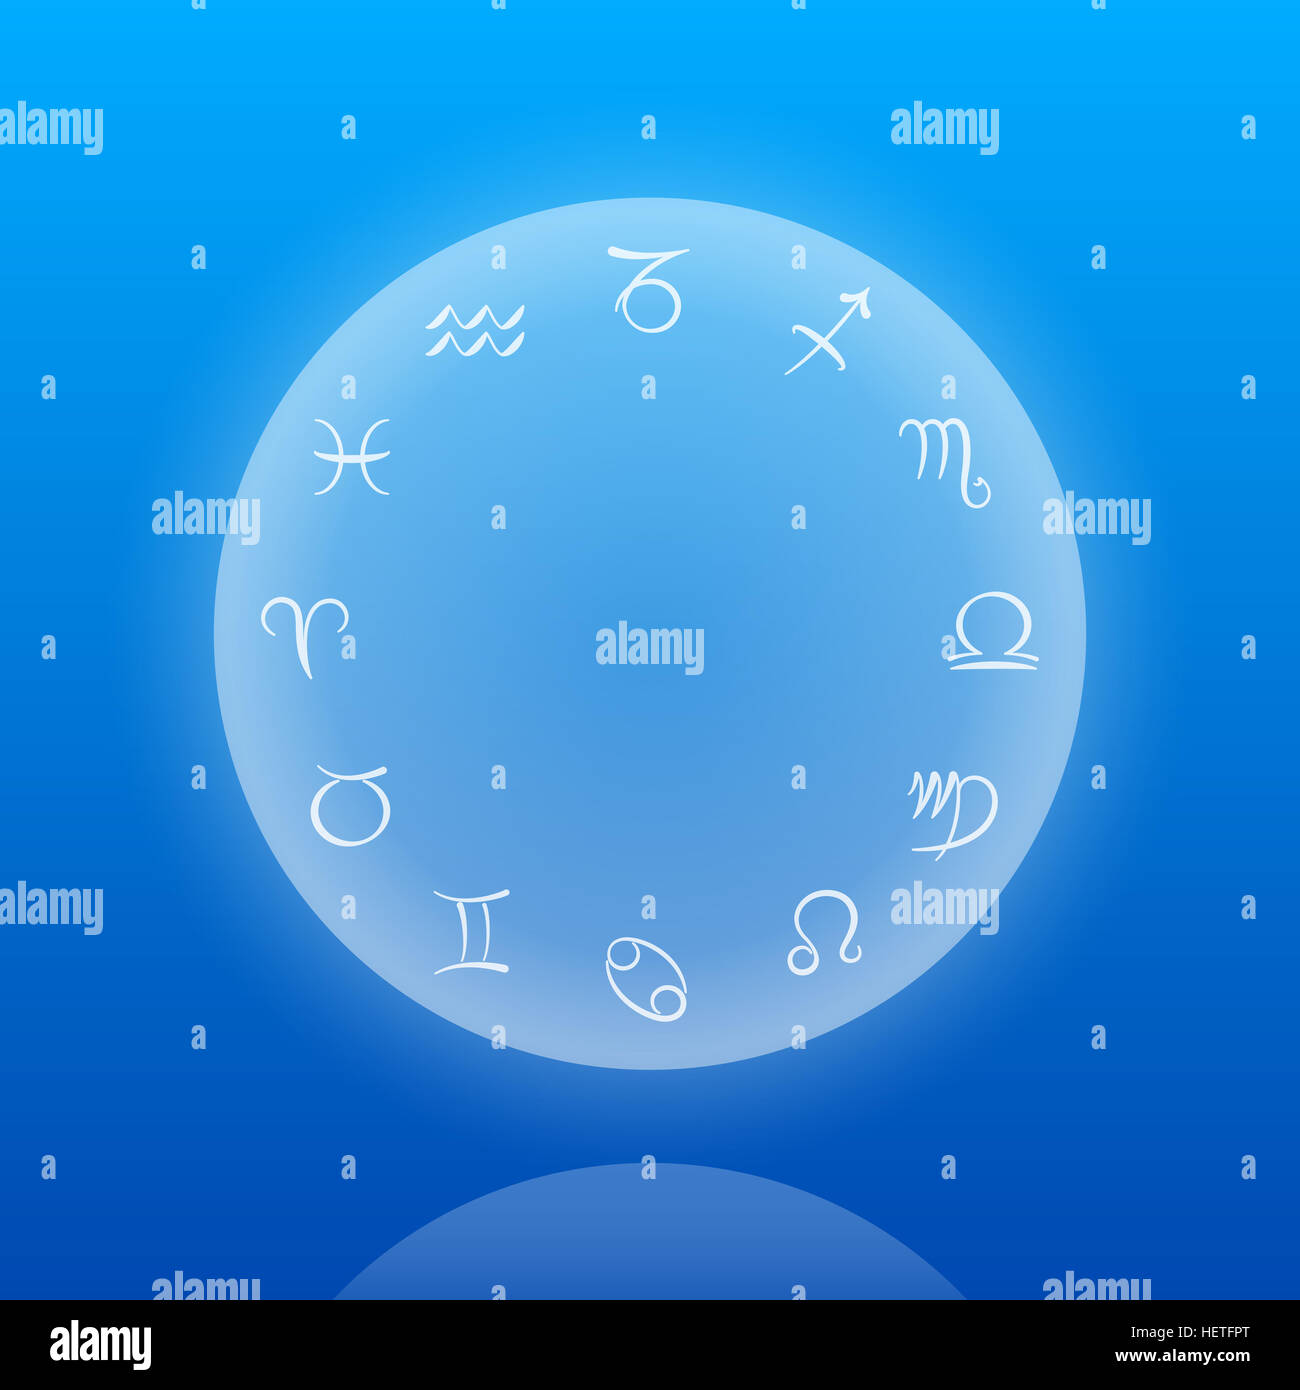 Astrology sings of the zodiac on a floating sphere on ocean blue background. Stock Photo